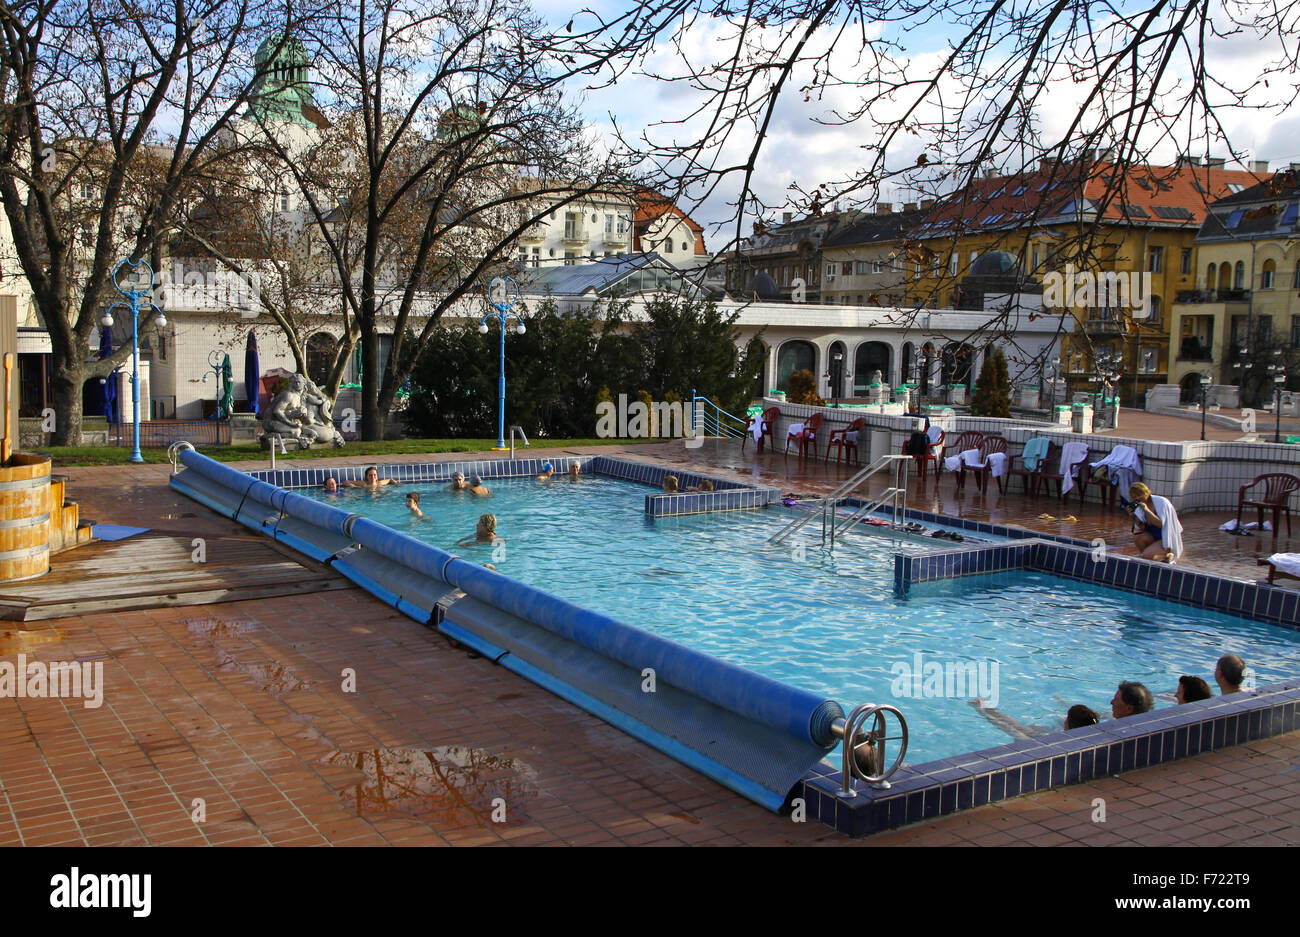 BUDAPEST, HUNGARY - JANUARY 4, 2013: People have a thermal bath in the Gellert spa on January 4, 2013 in Budapest, Hungary Stock Photo